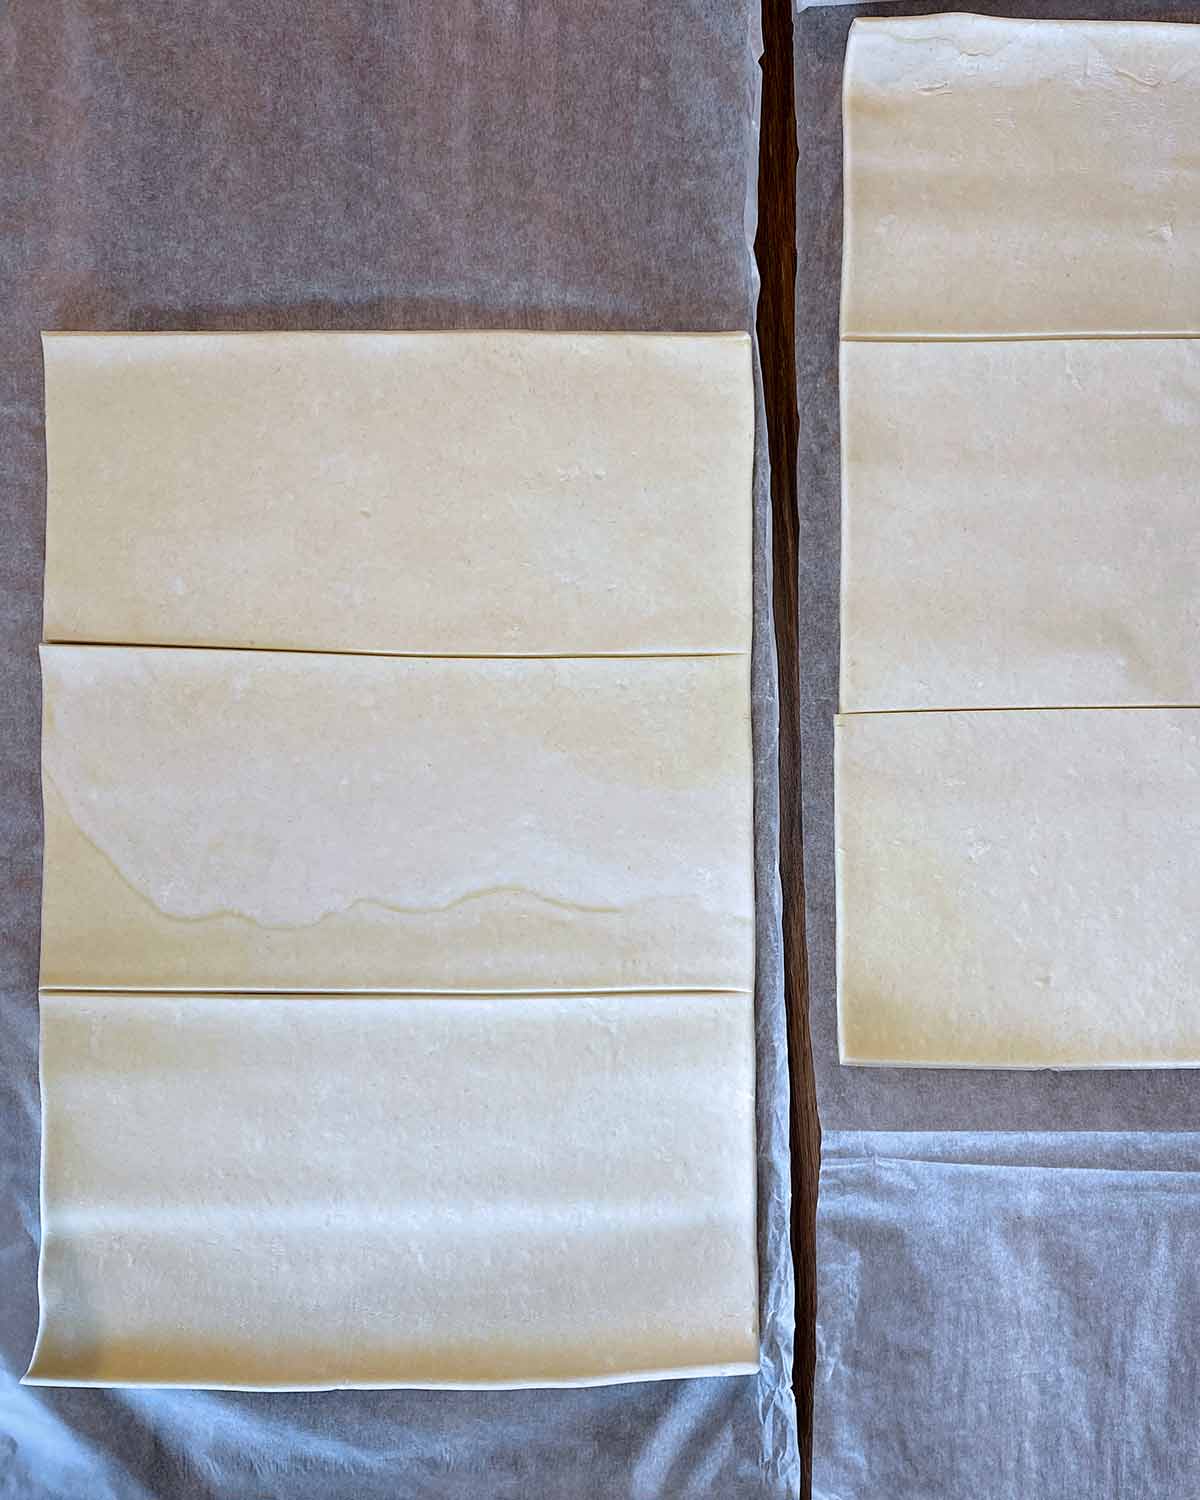 Two sheets of puff pastry cut into three pieces each.